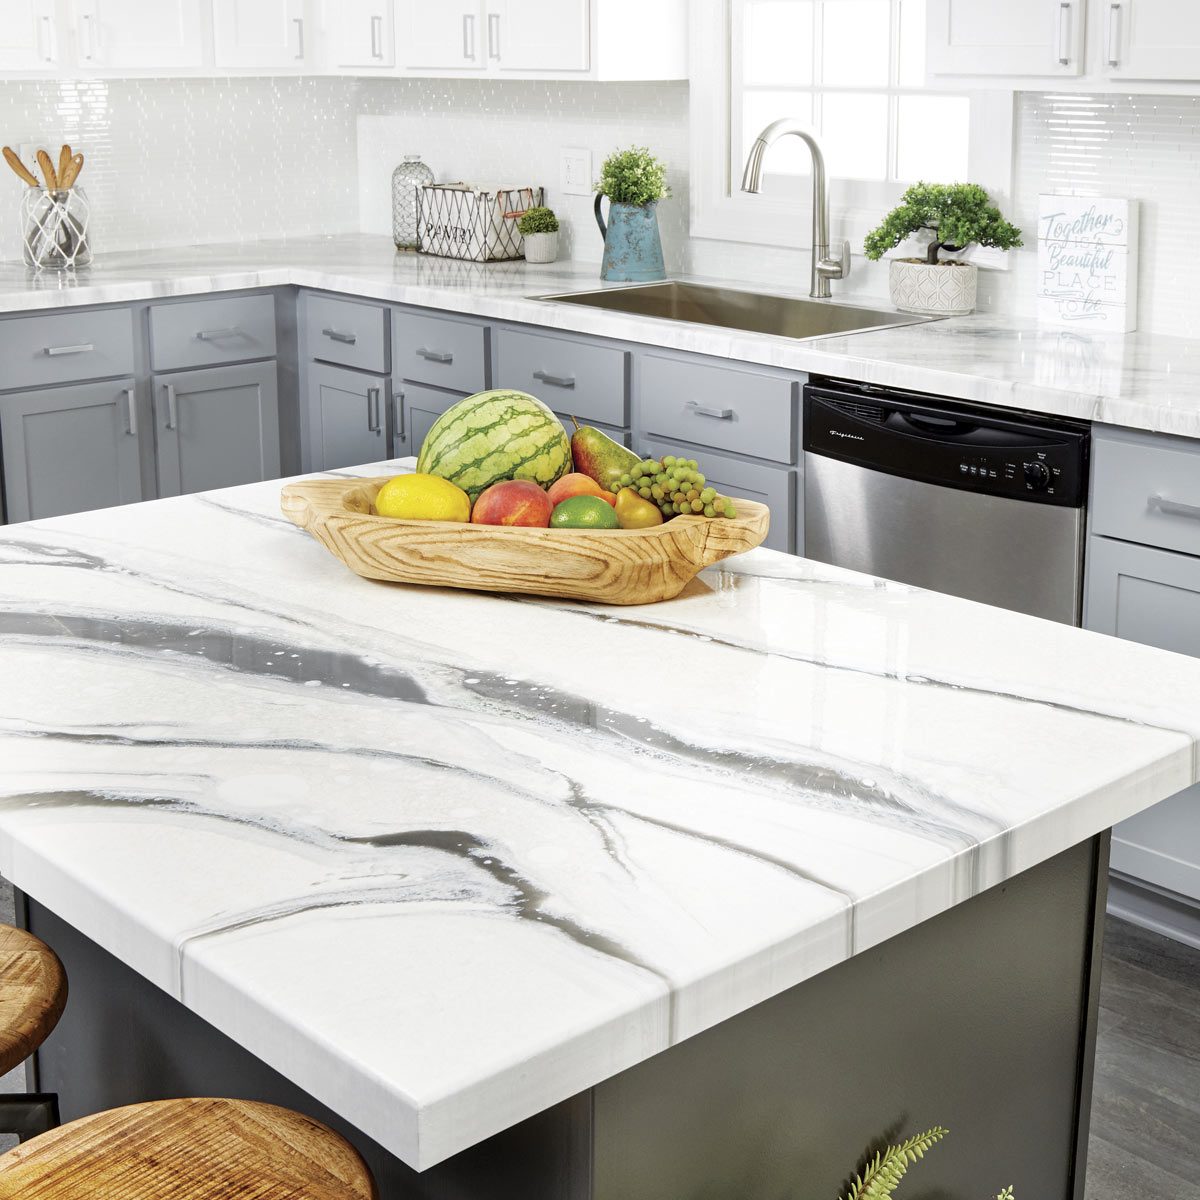 Diy Epoxy Countertops How To Pour An, How To Paint Laminate Countertops Look Like Marble